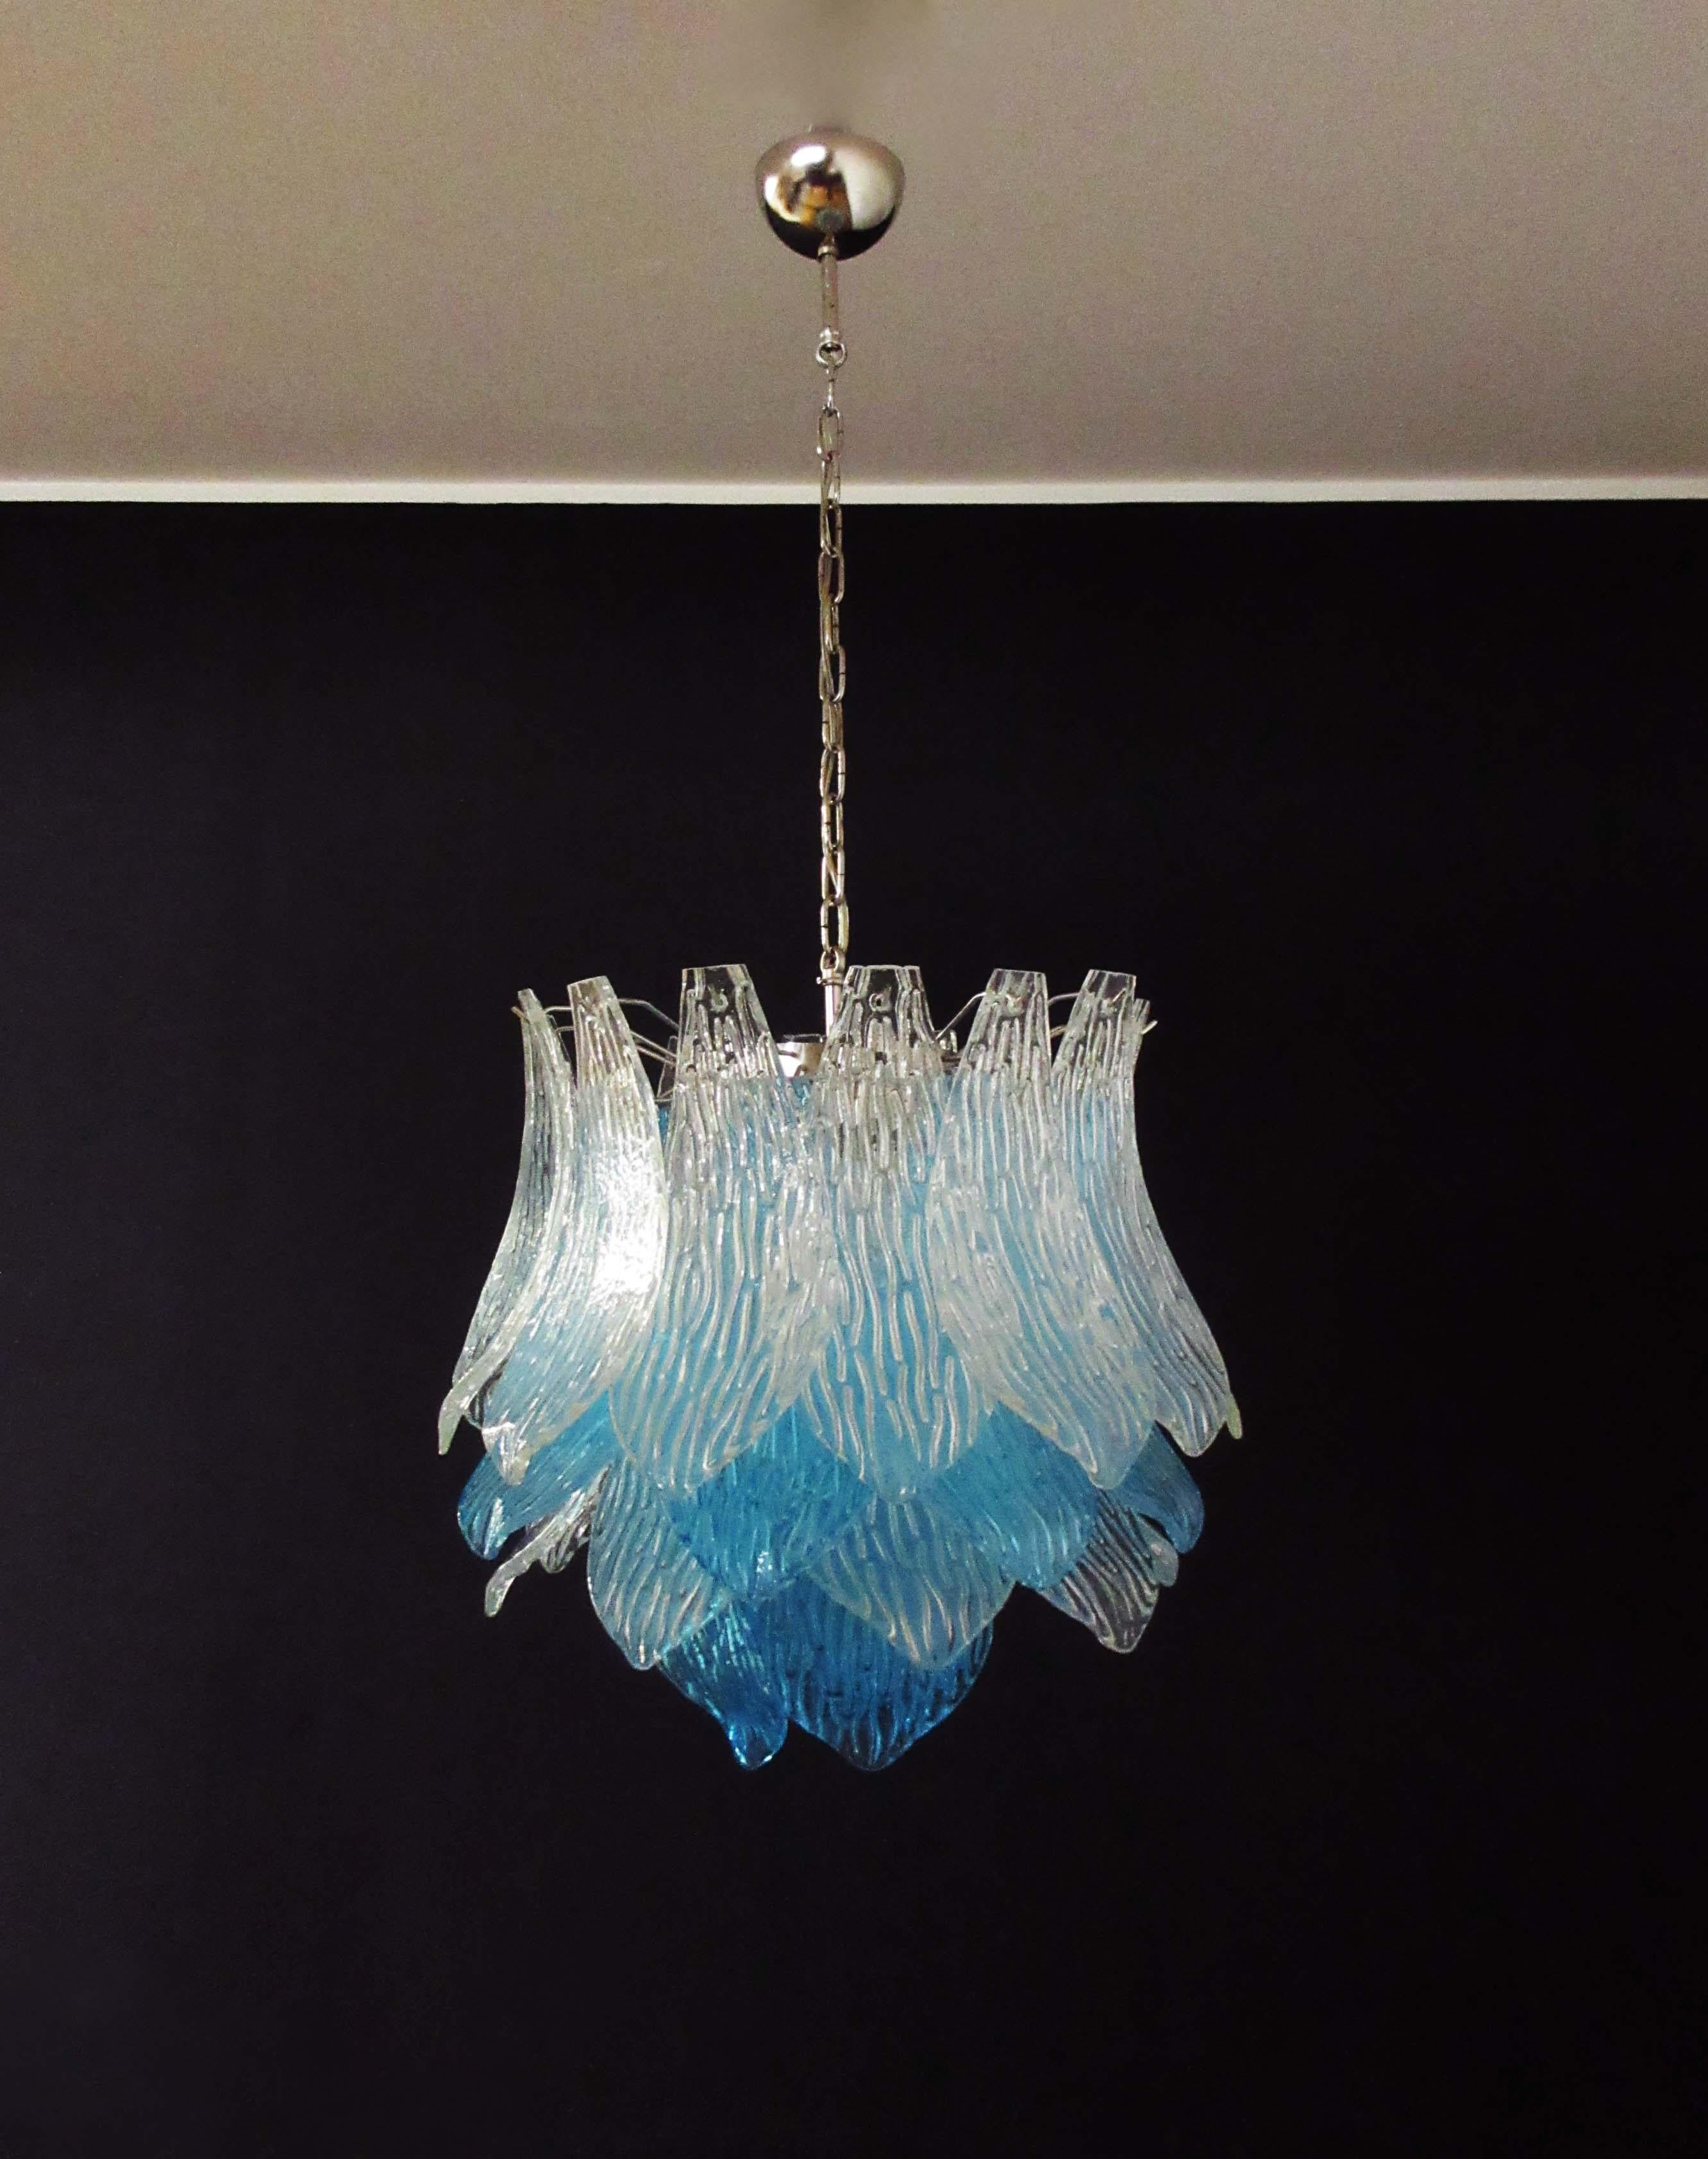 Mid-Century Modern Talian Vintage Murano Glass Chandelier, 38 Glasses, Blue and Trasparent